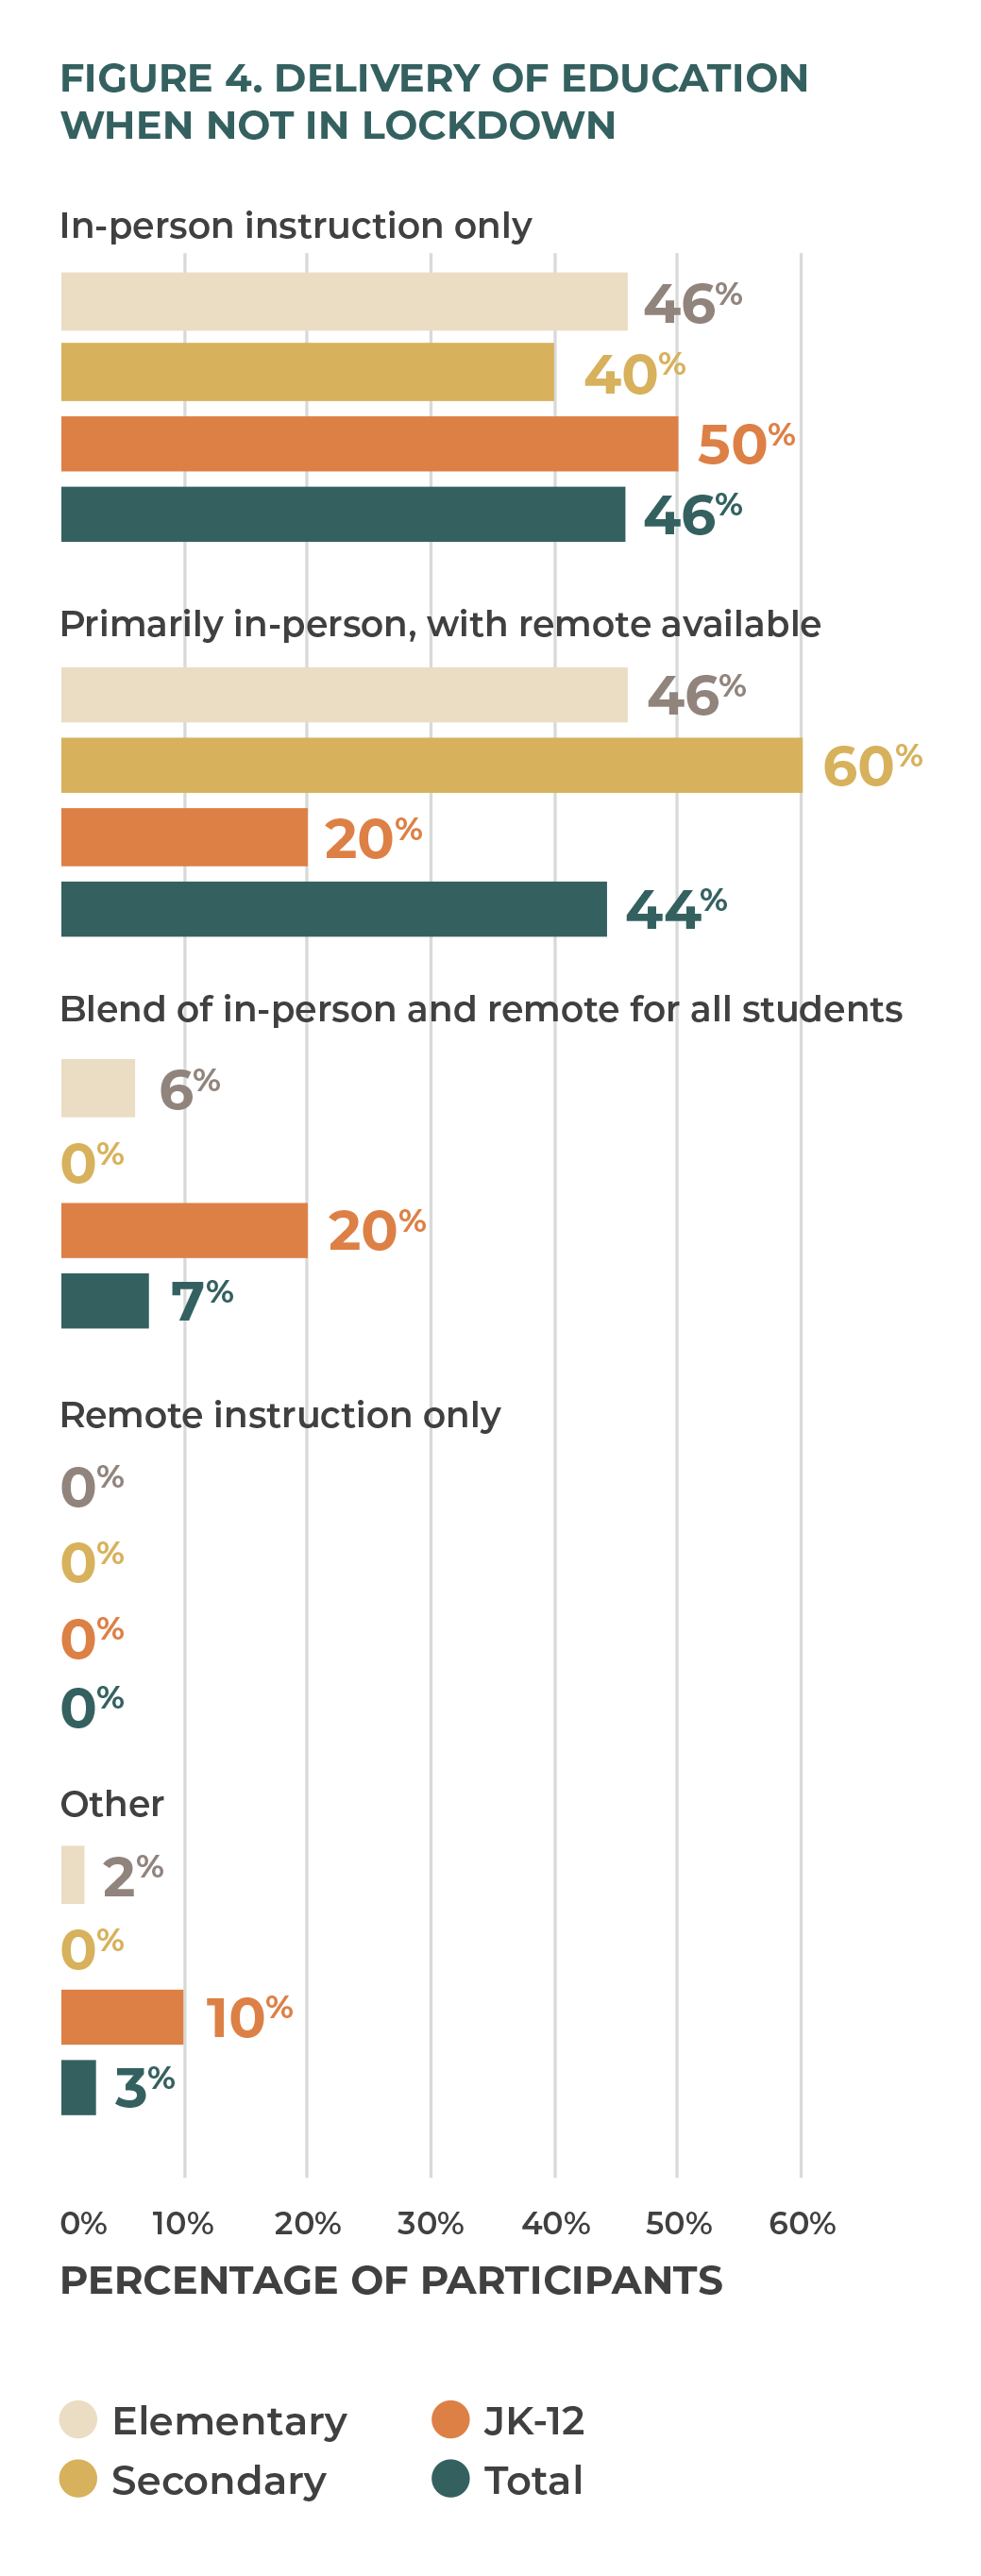 Figure 4. Delivery of Education When Not in Lockdown.